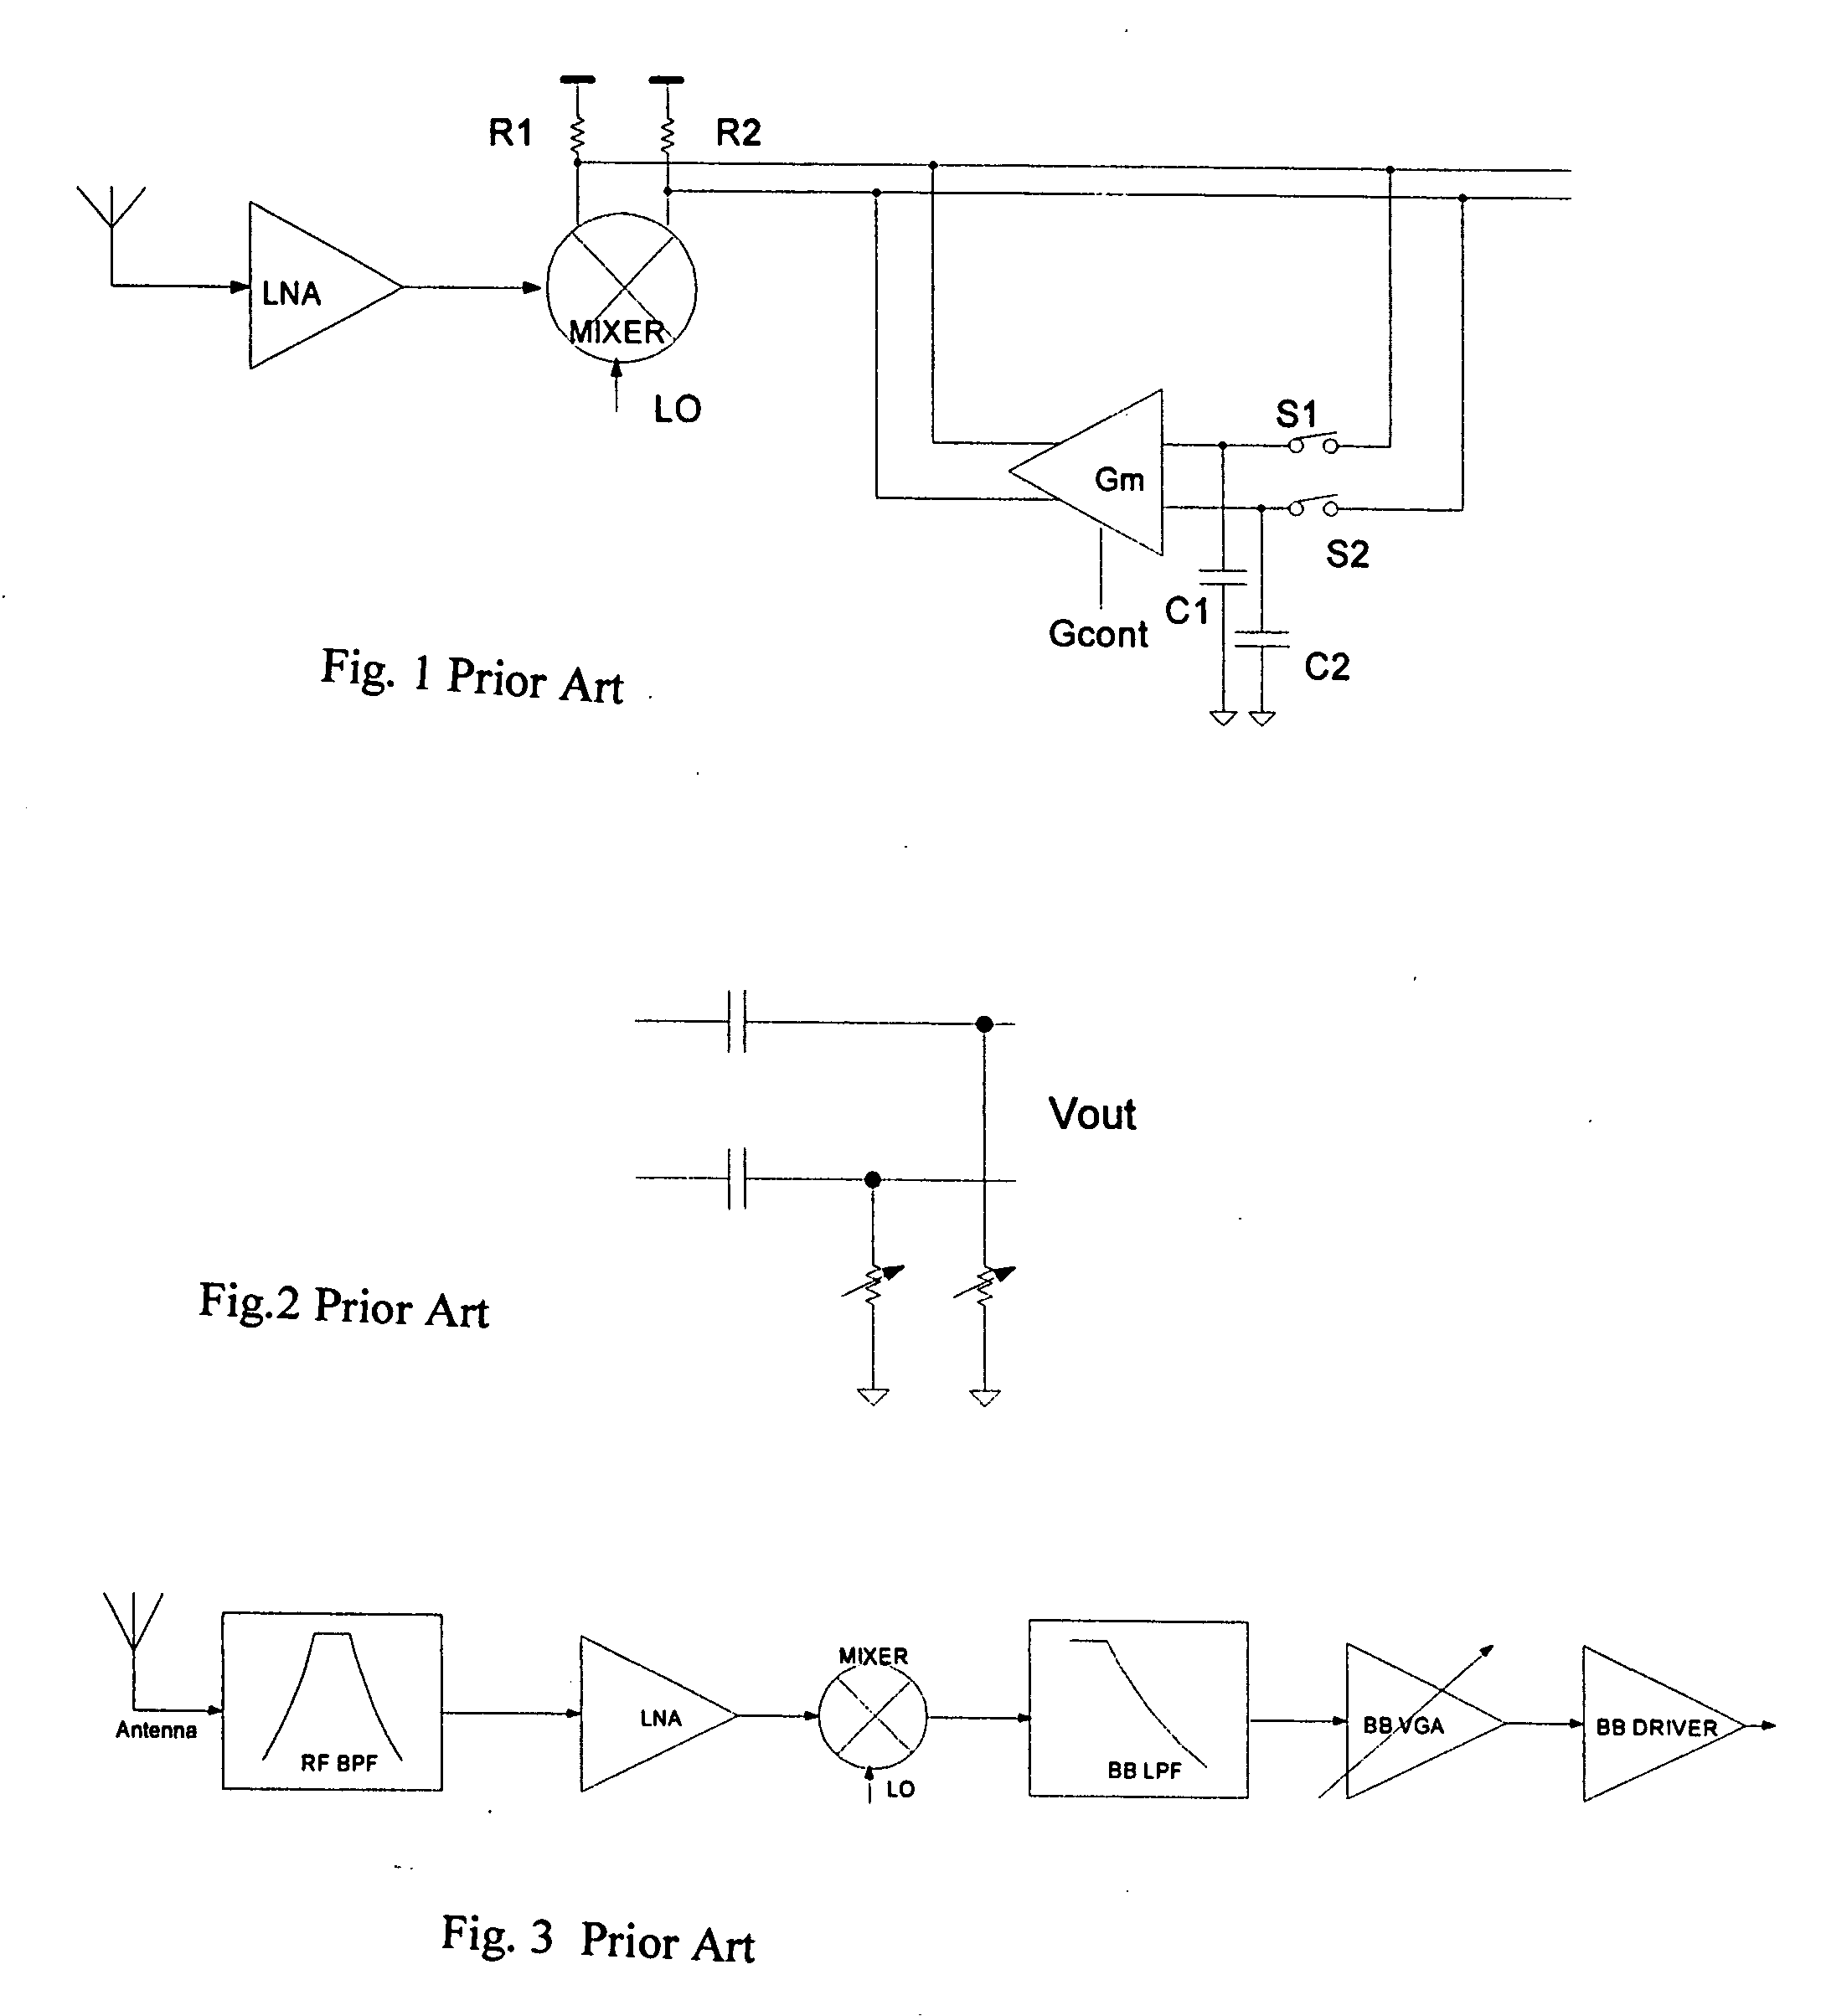 DC offset cancellation in a direct-conversion receiver